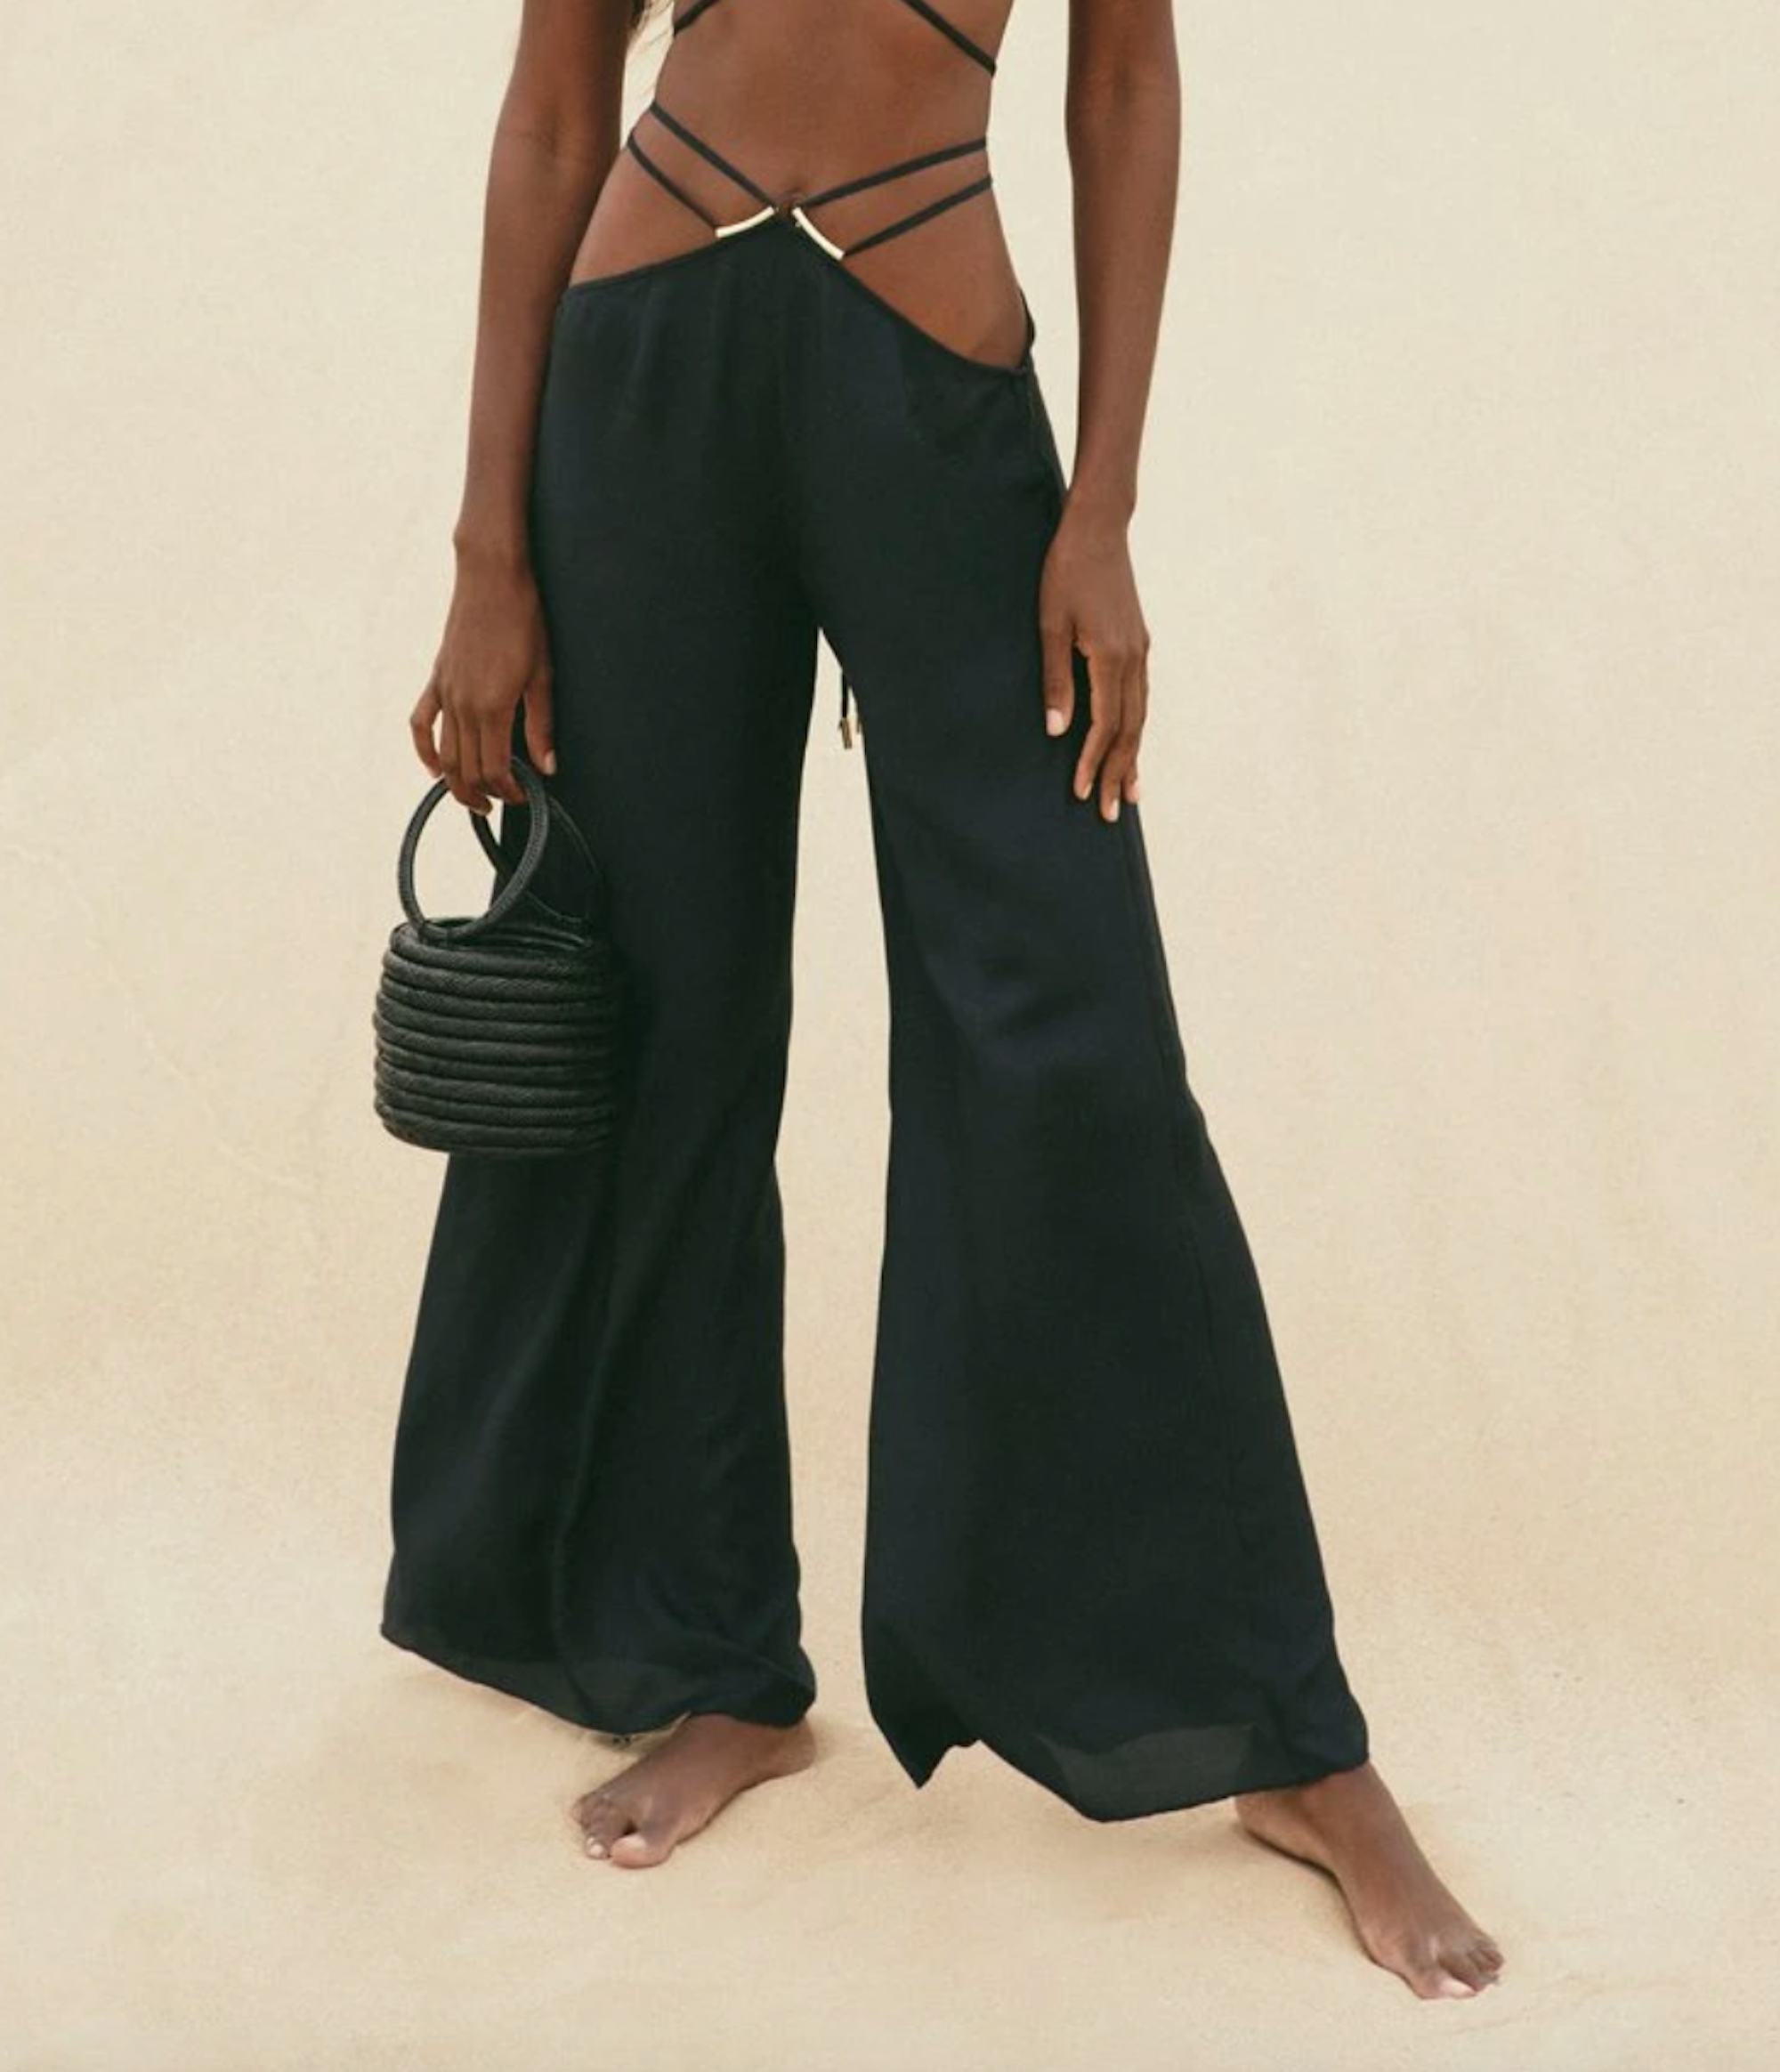 Pelvic Cutouts Are The Skin-Baring Trend You’ll Actually Want To Try